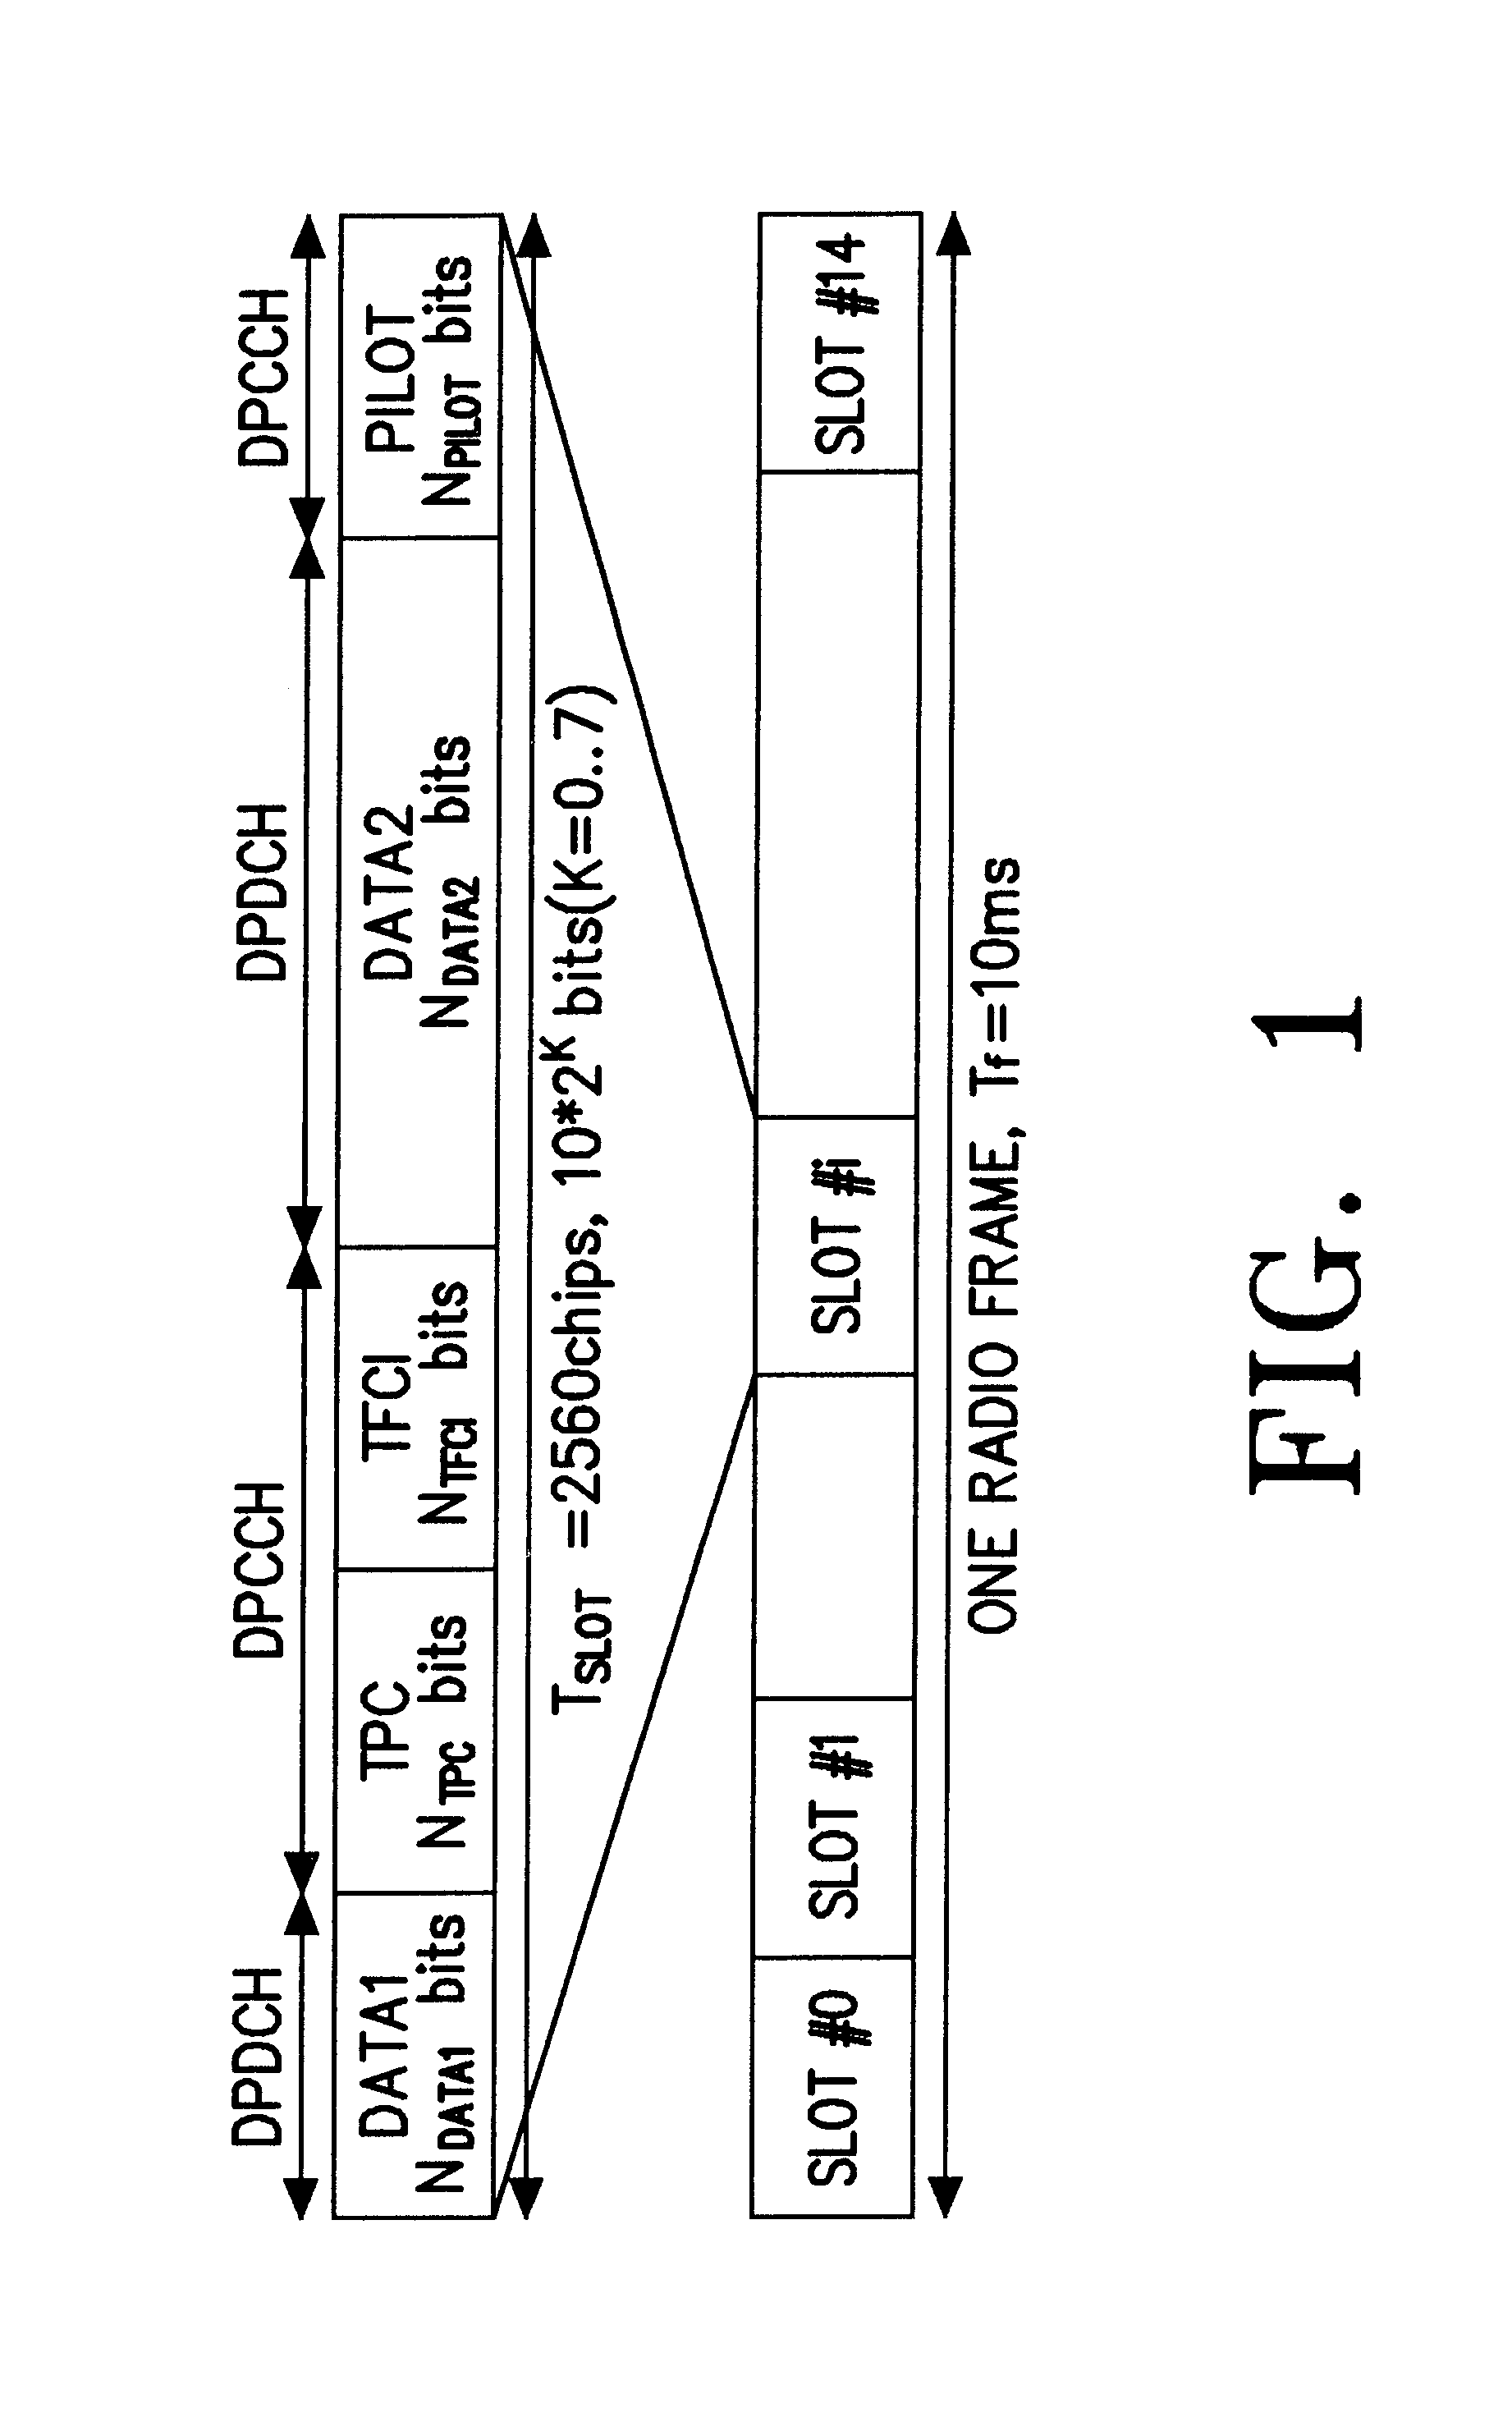 Apparatus and method for gating dedicated physical control channel in a mobile communication system